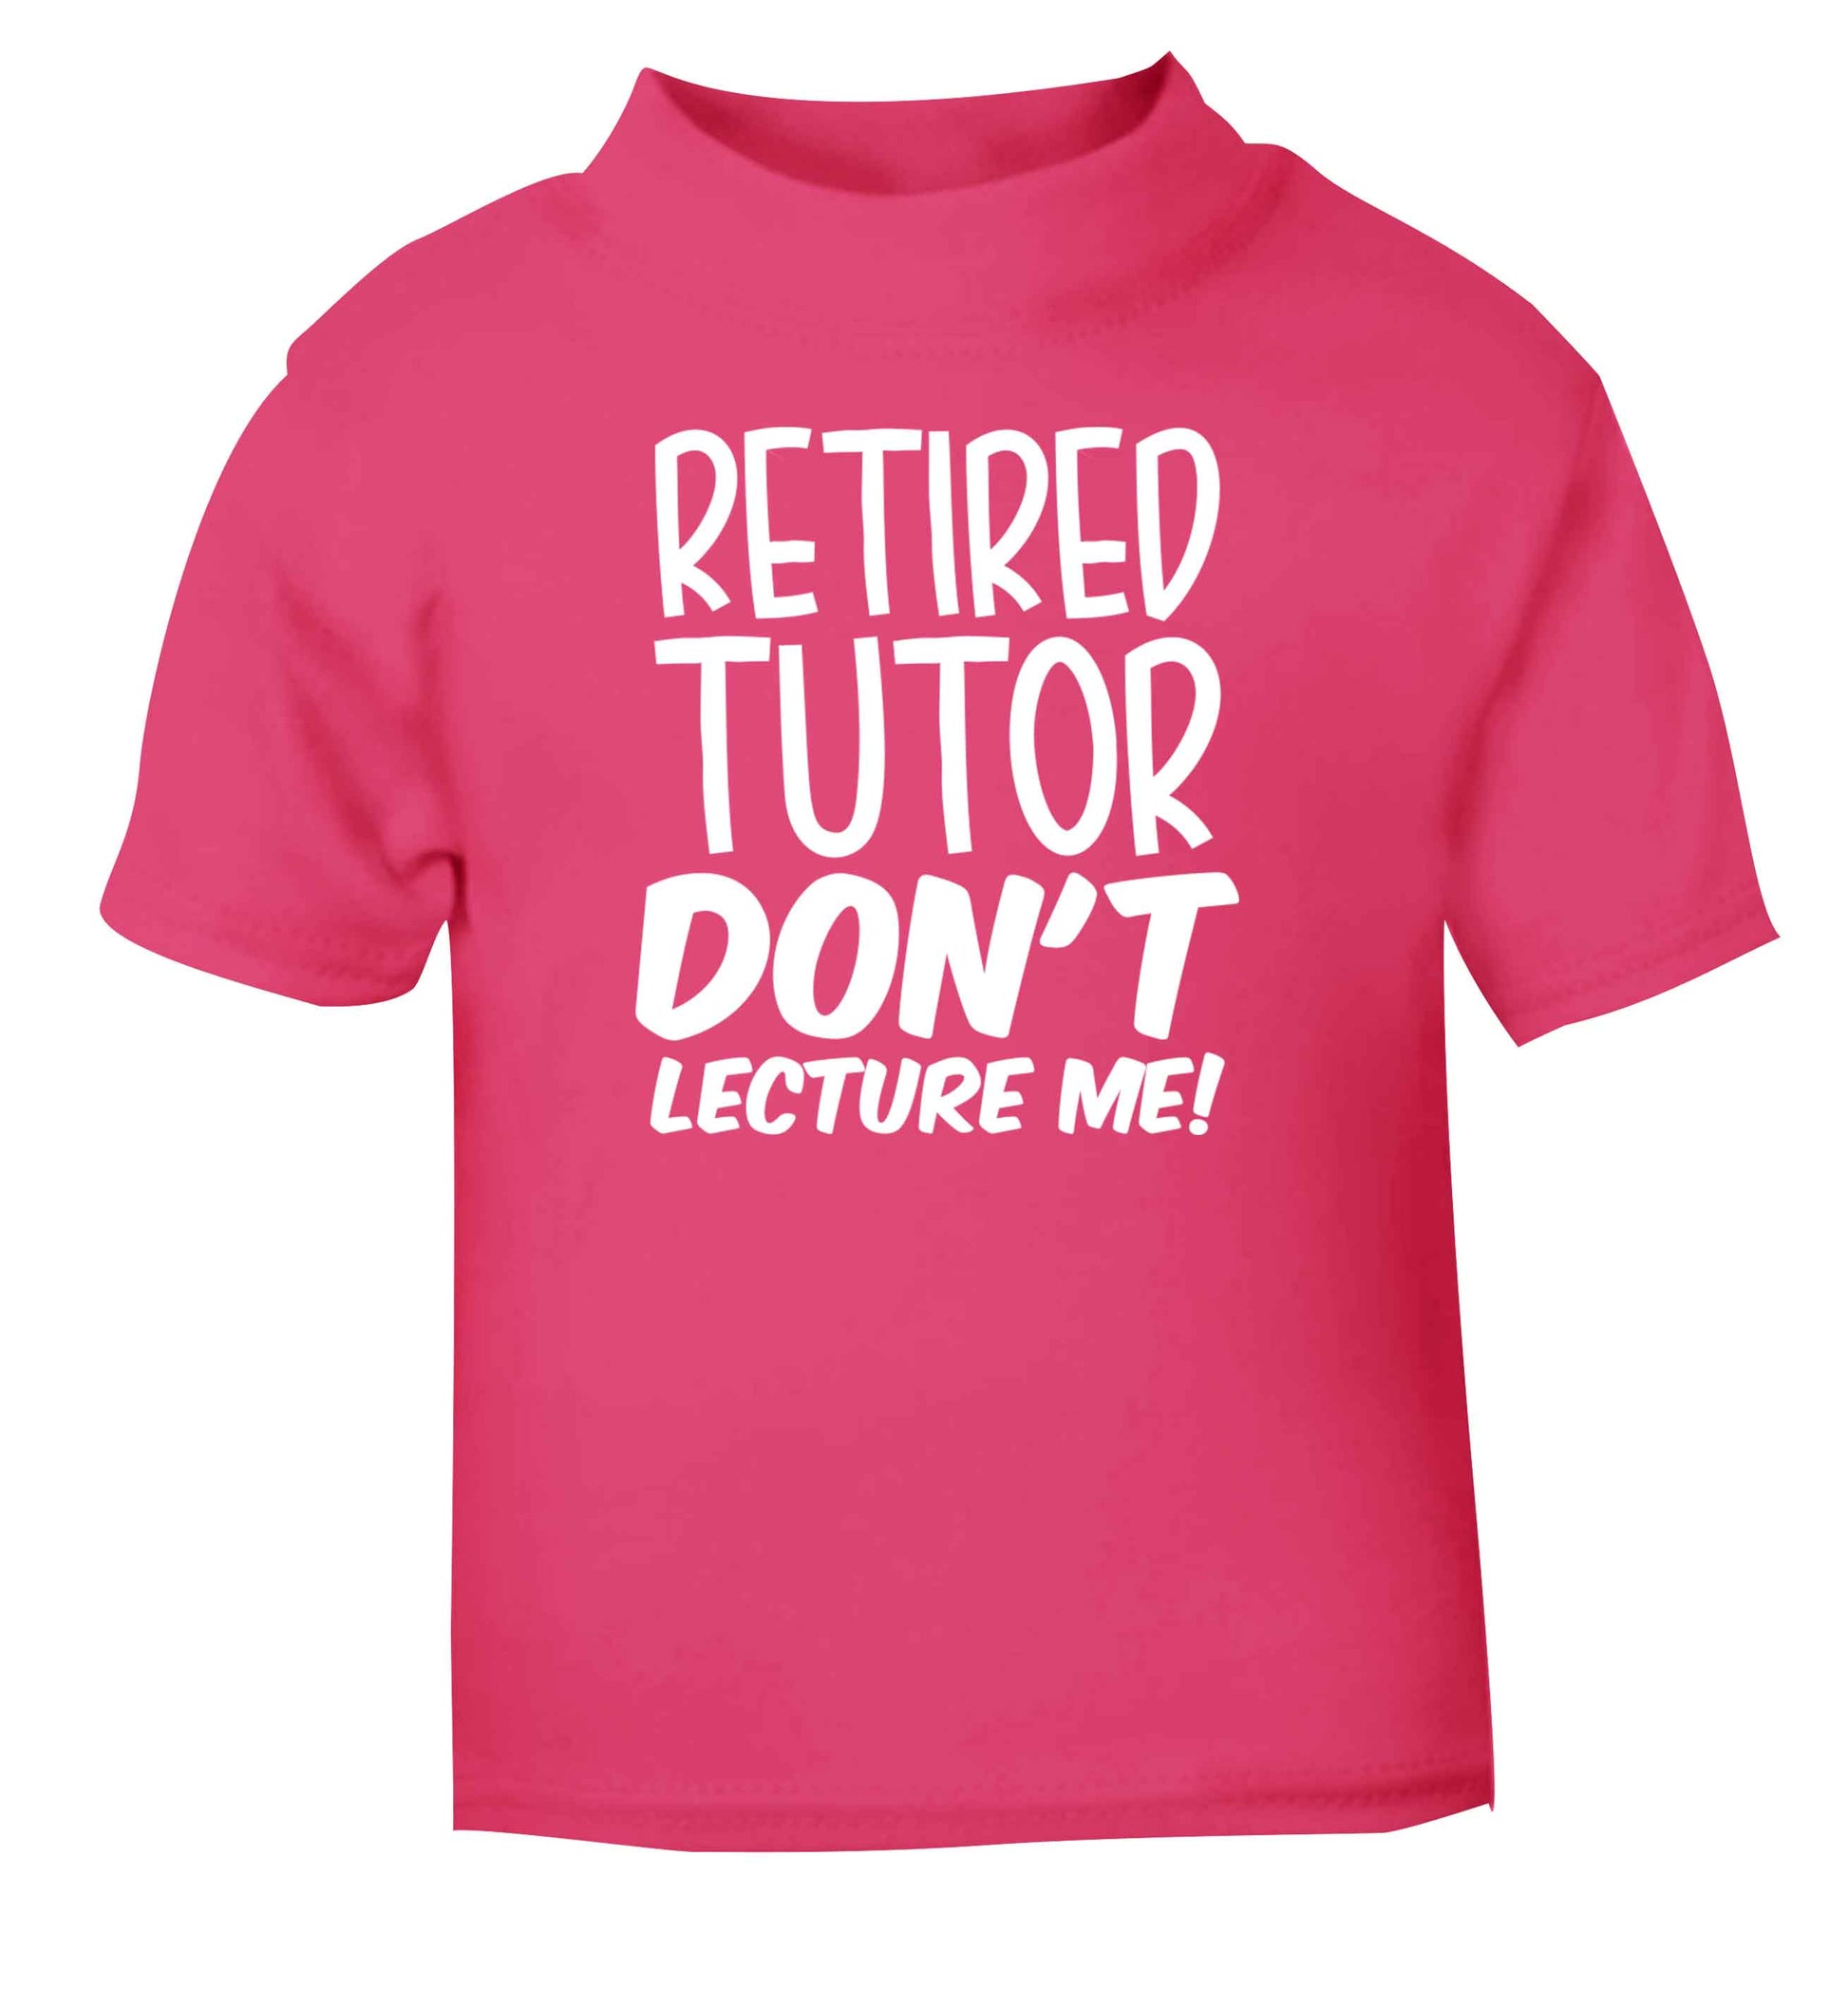 Retired tutor don't lecture me! pink Baby Toddler Tshirt 2 Years